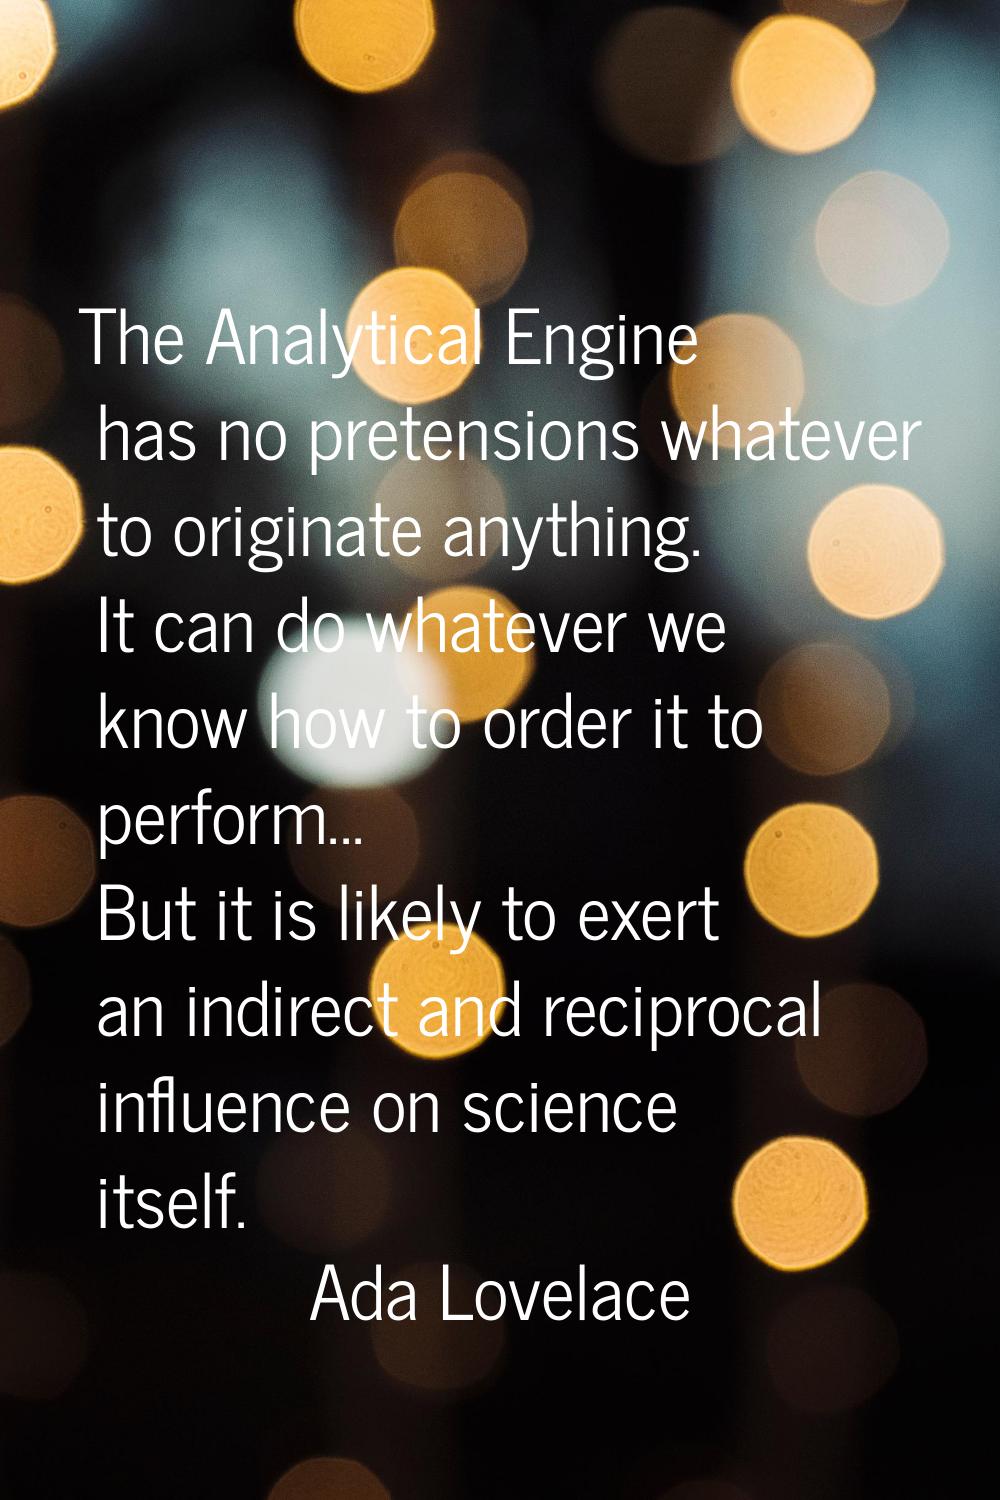 The Analytical Engine has no pretensions whatever to originate anything. It can do whatever we know